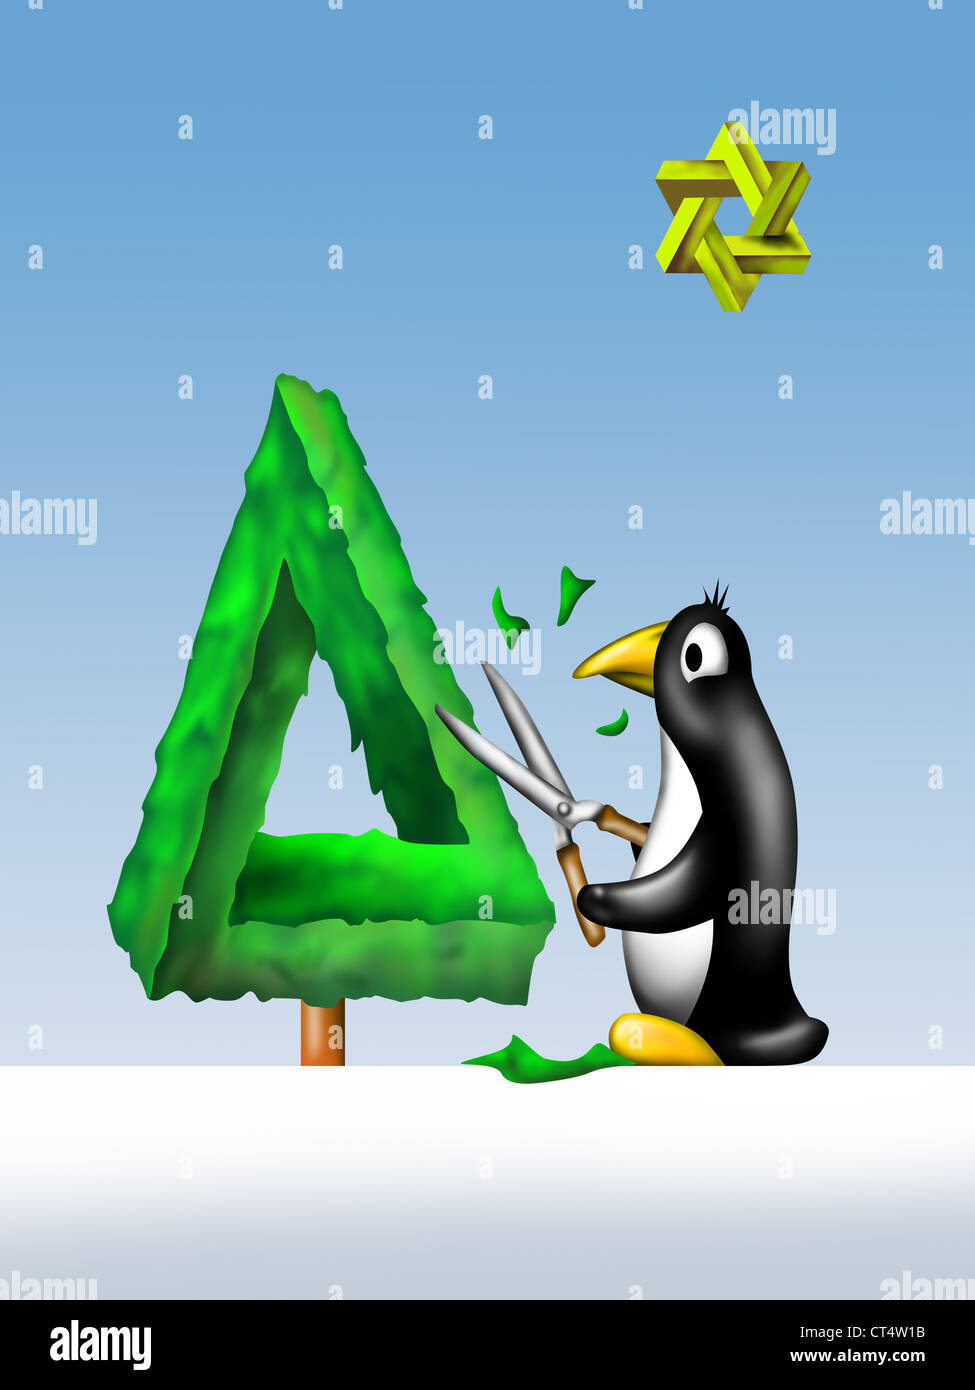 Illustration of a penguin trimming an impossible Christmas tree Stock Photo